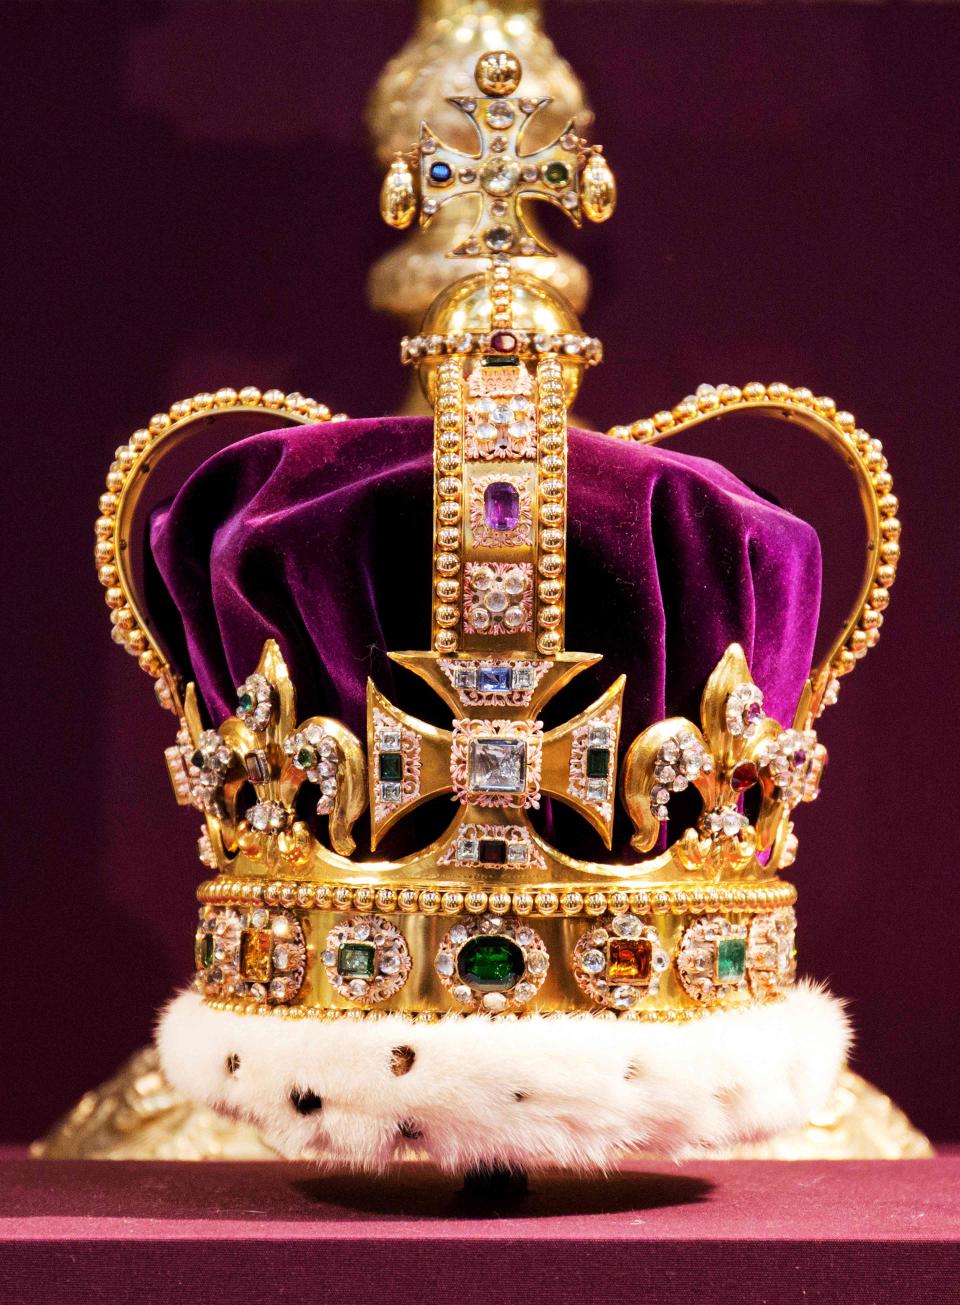 St. Edward's Crown is one of the coronation centerpieces and will sit atop King Charles' head, according to coronation tradition.